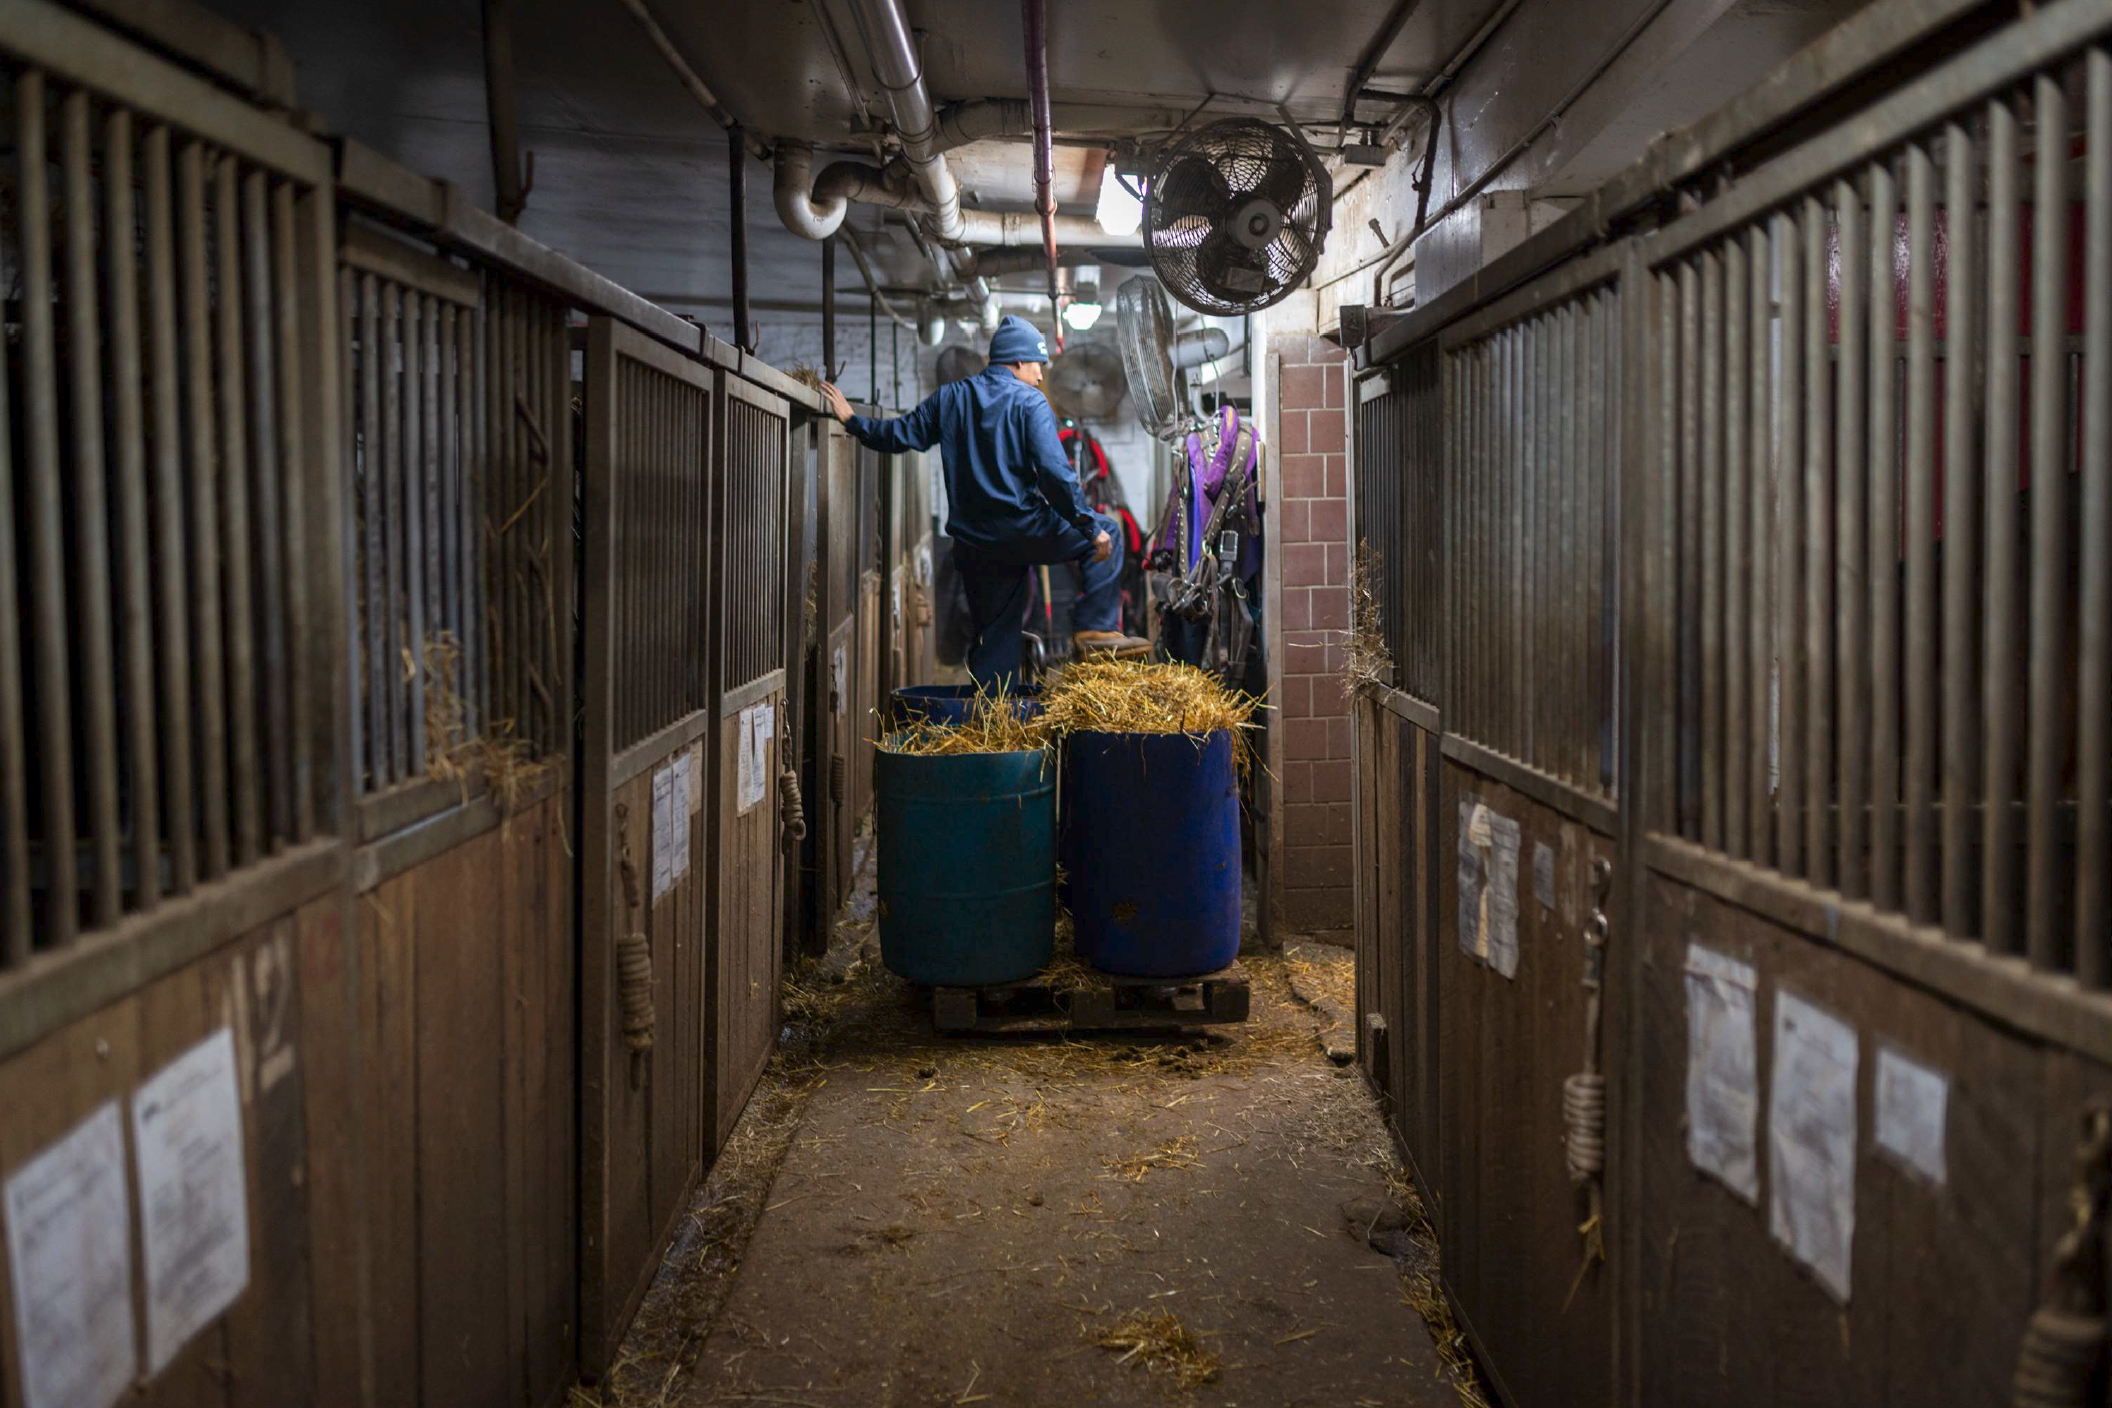  Gasper cleans the stalls in Clinton Park Stable, New York, February 2019. 